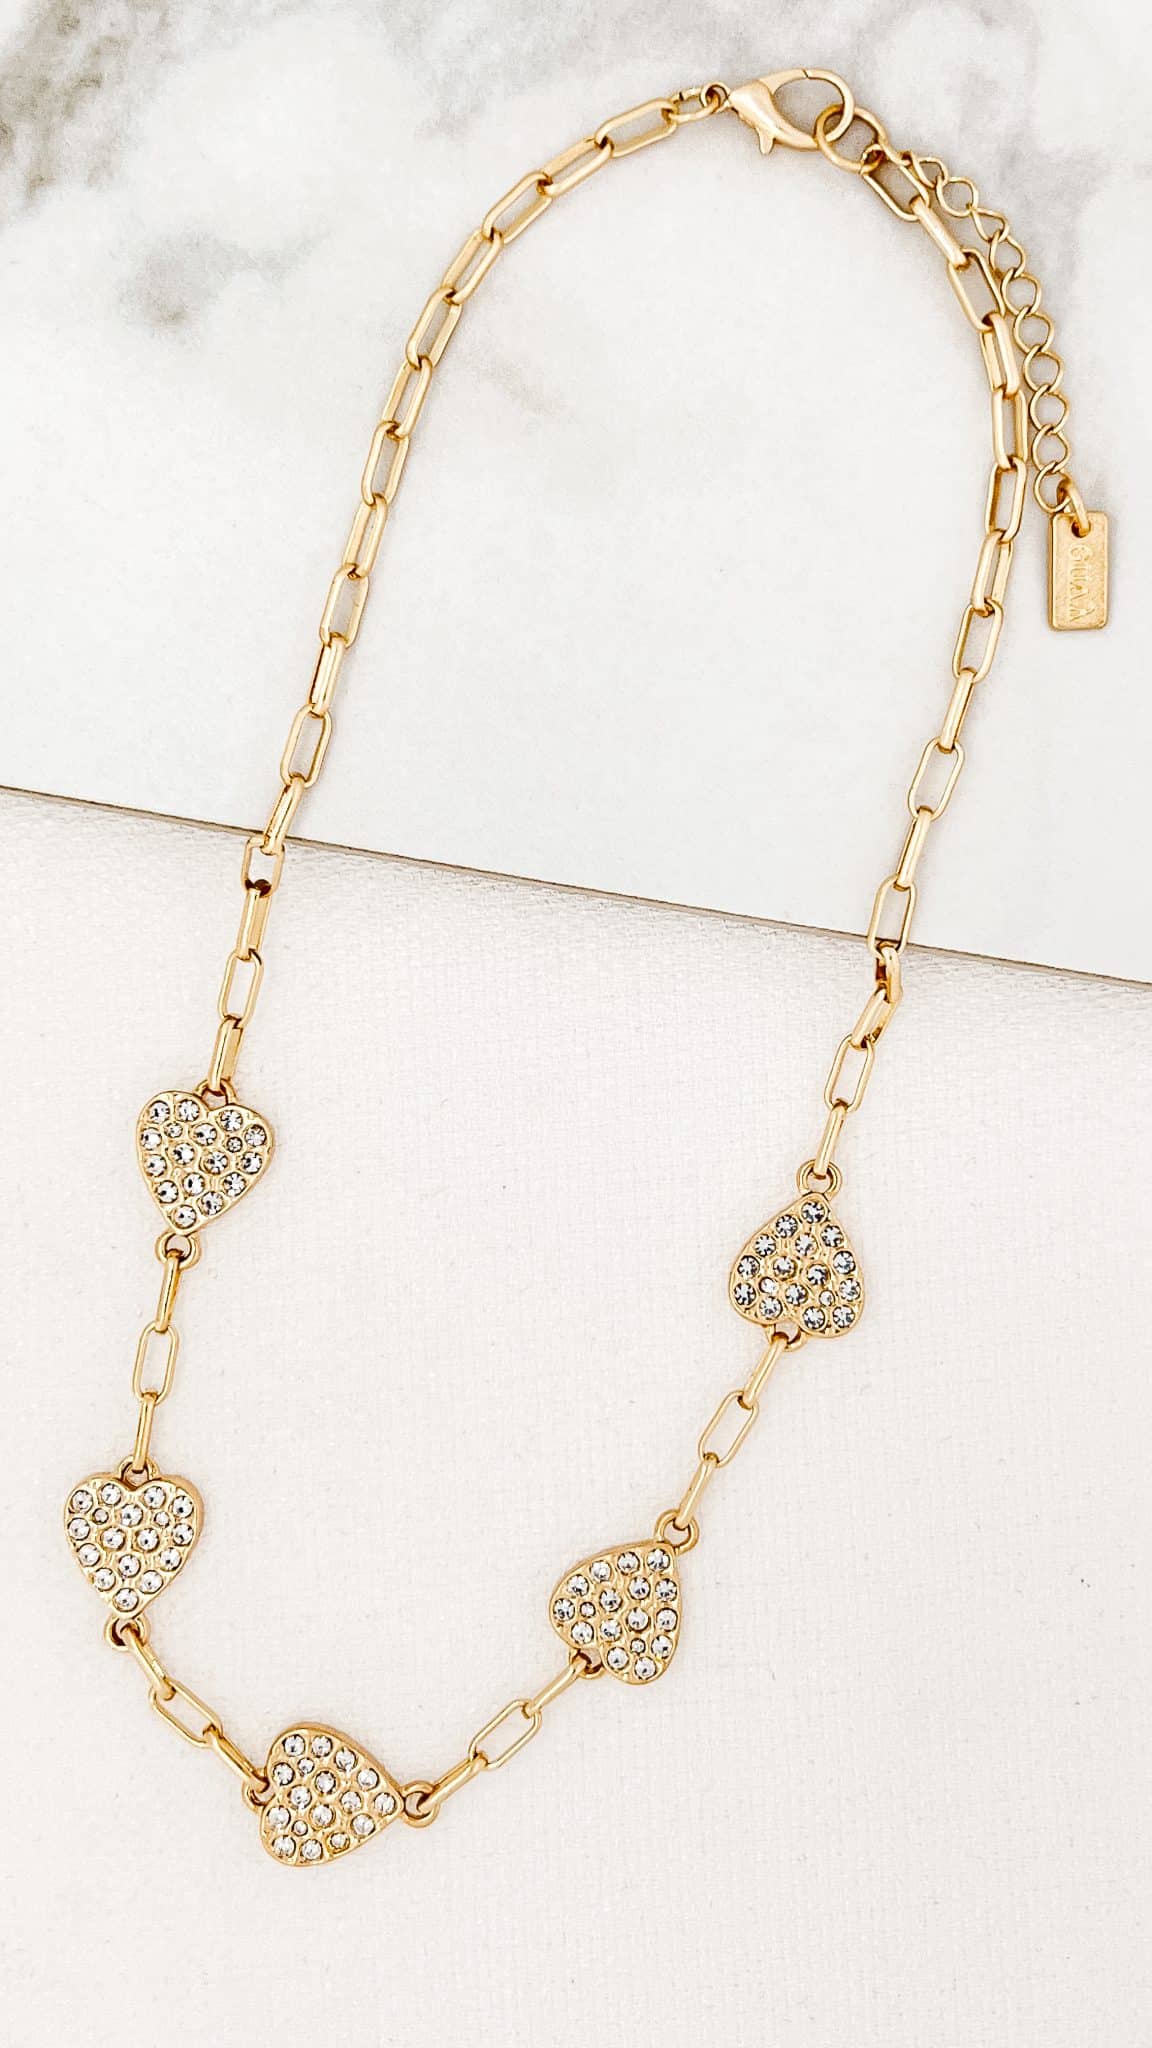 ENVY JEWELLERY Gold Necklace with Diamante Hearts